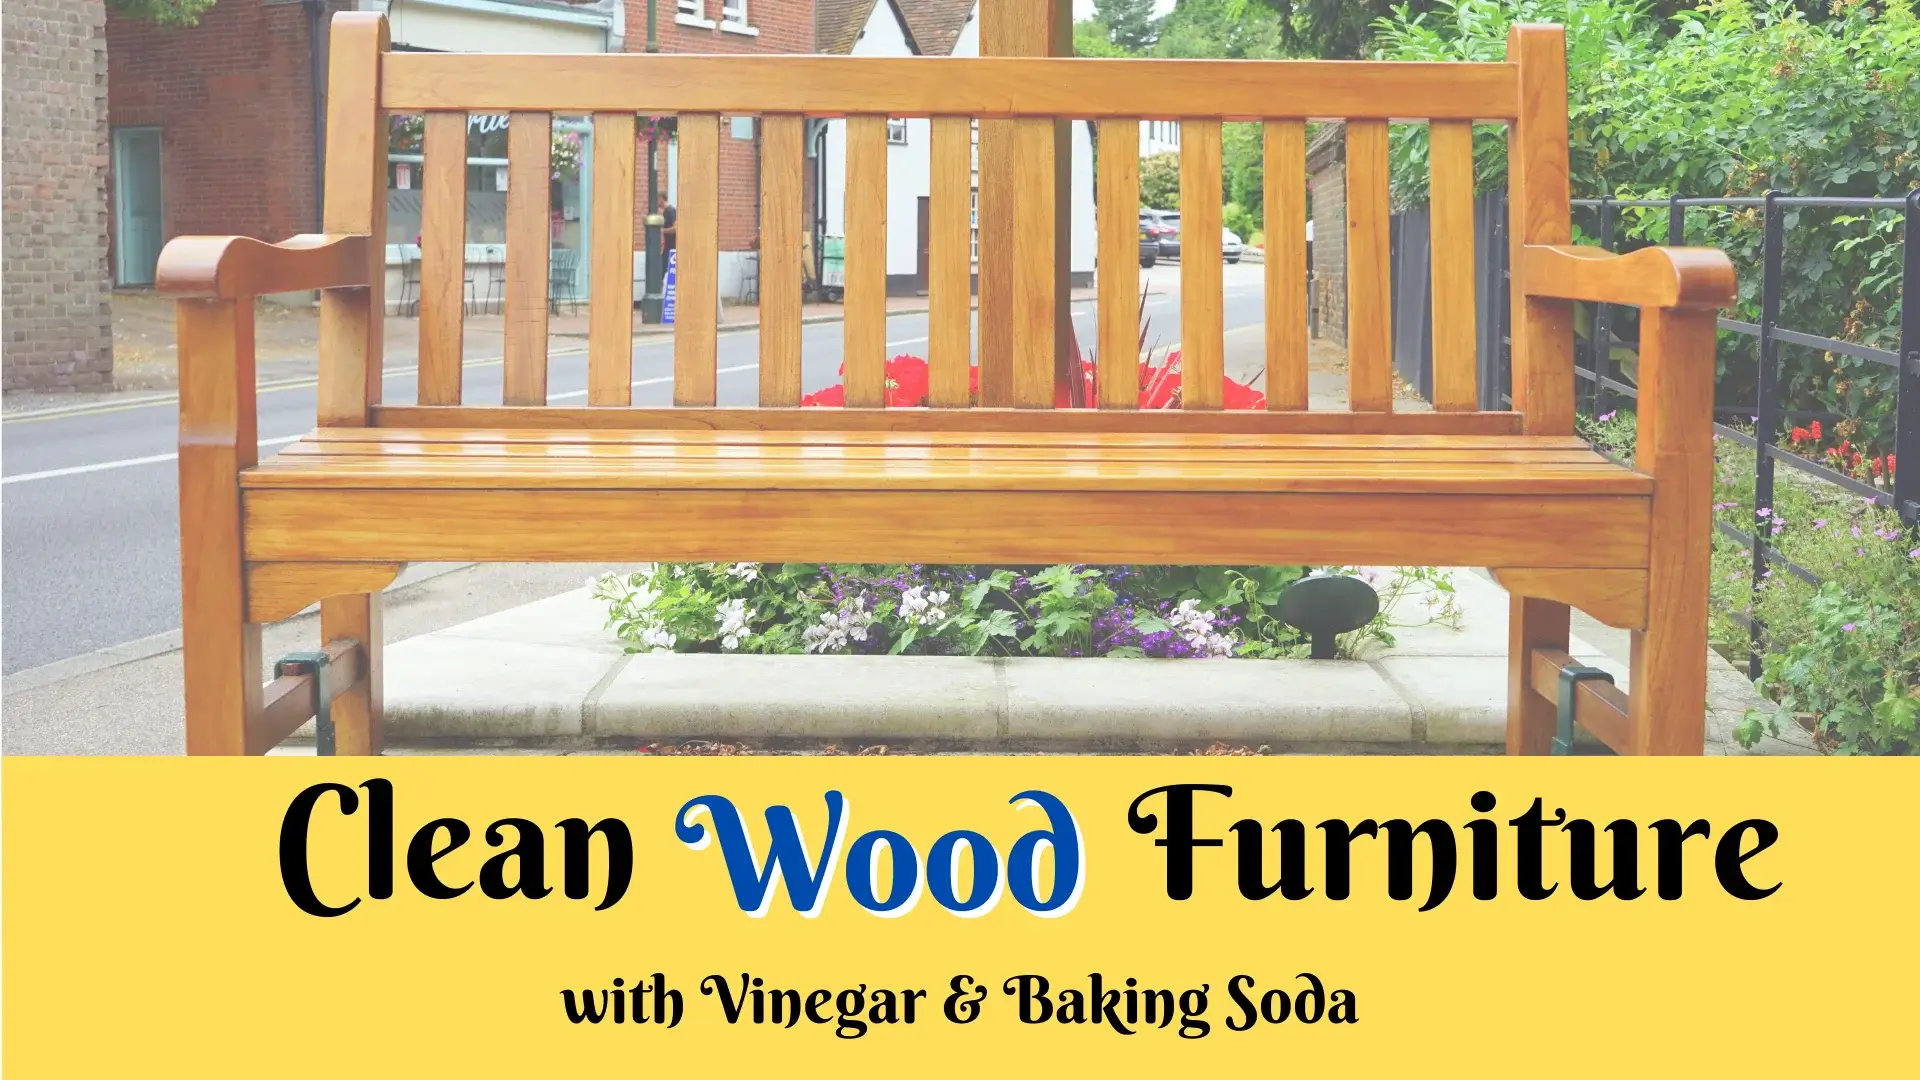 How to Clean Wood Furniture with Vinegar and Baking Soda